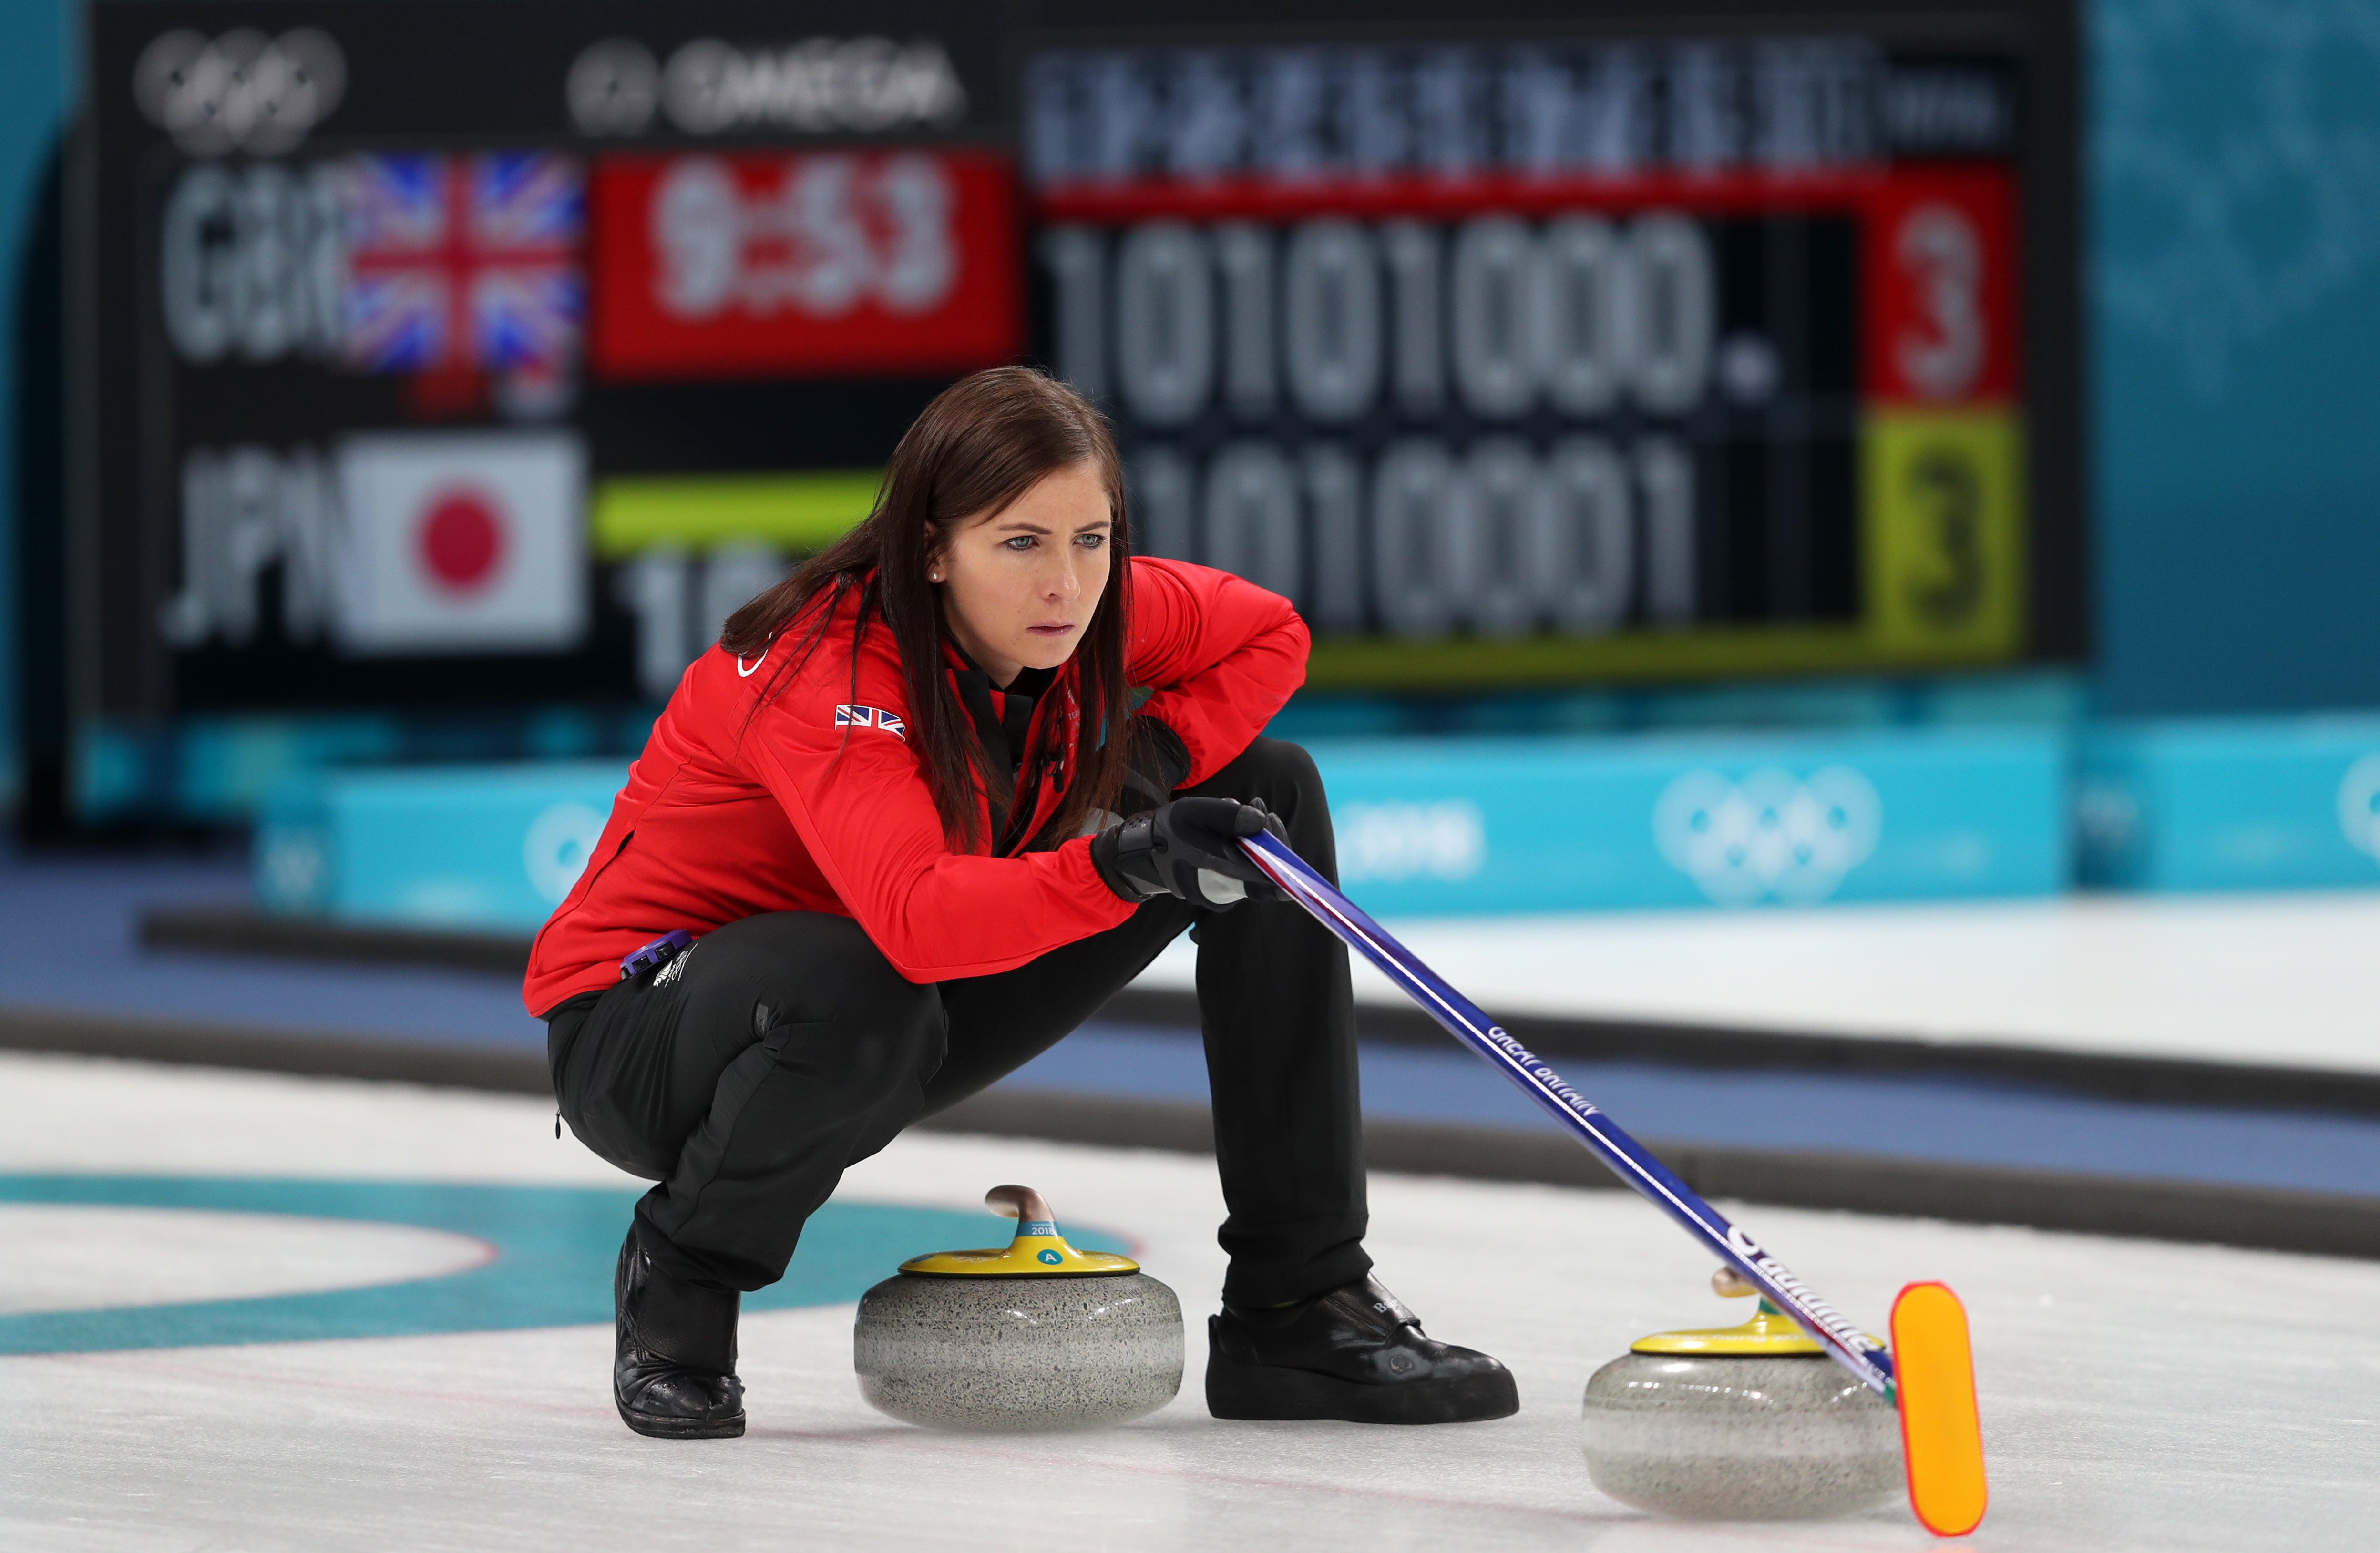 Eve Muirhead is confident about Britain’s chances in Beijing